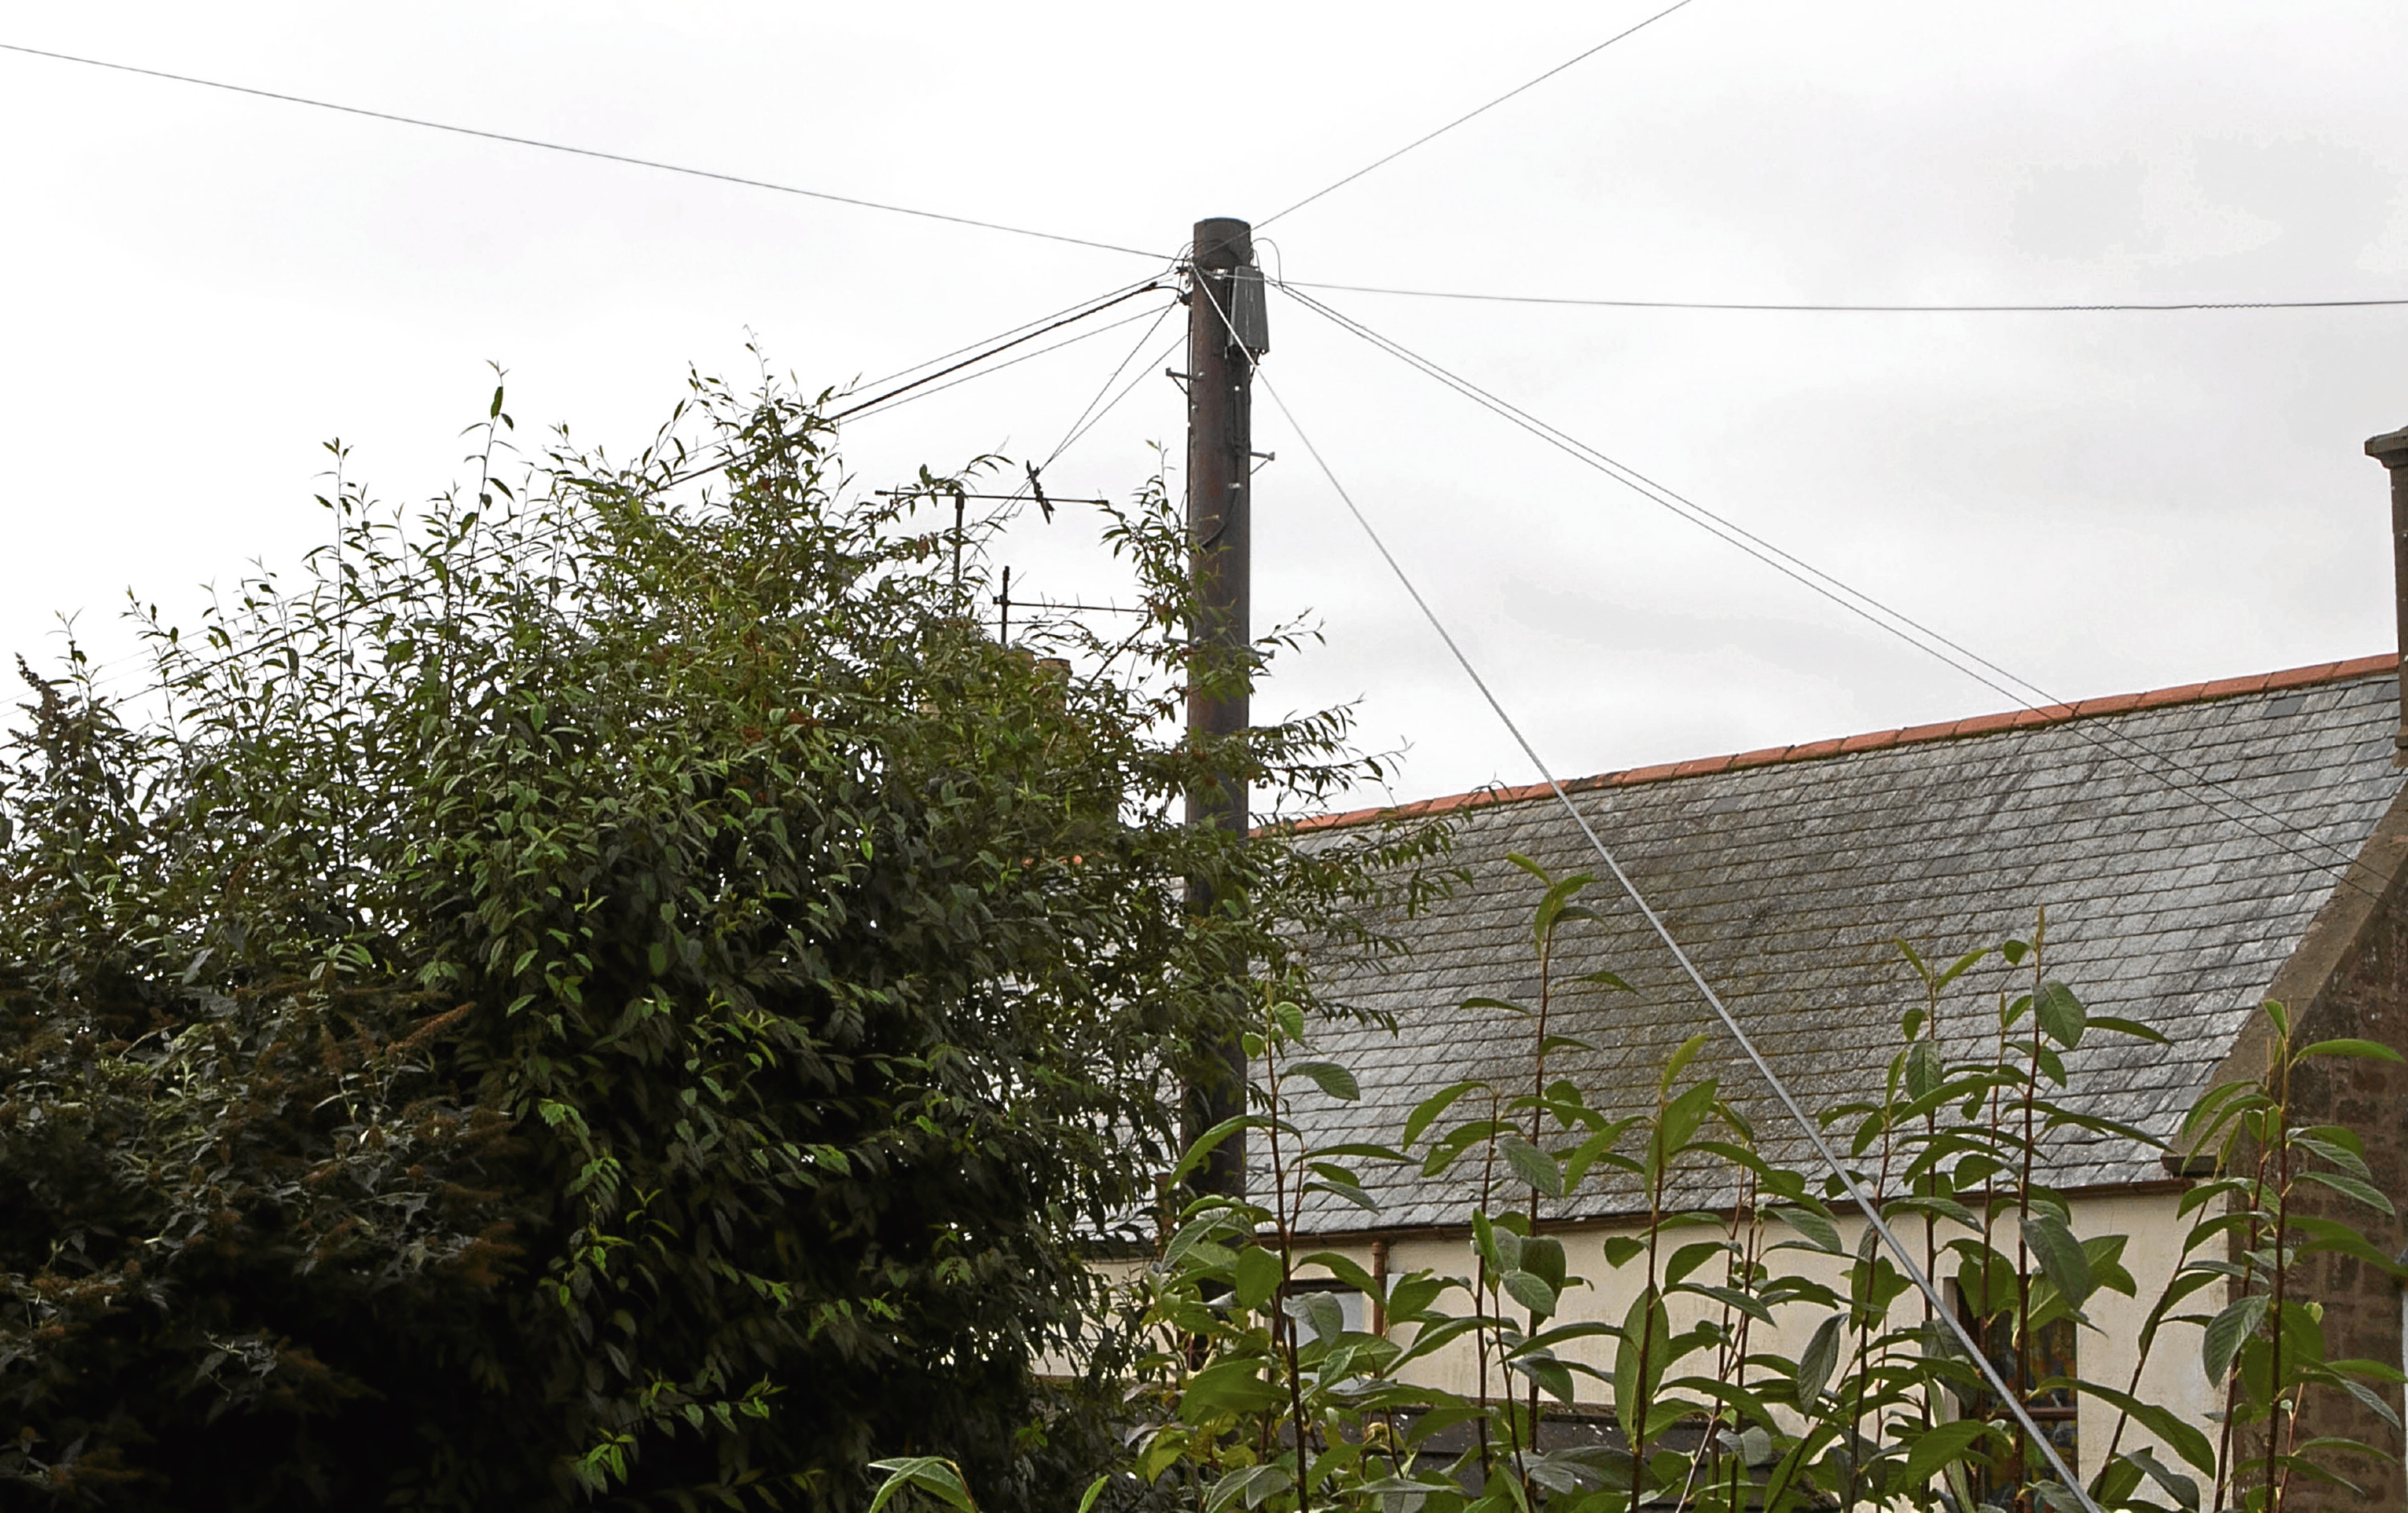 Sandy Massie needed a new phone line put in place in his back garden (although the pole was actually situated in a neighbour's garden)